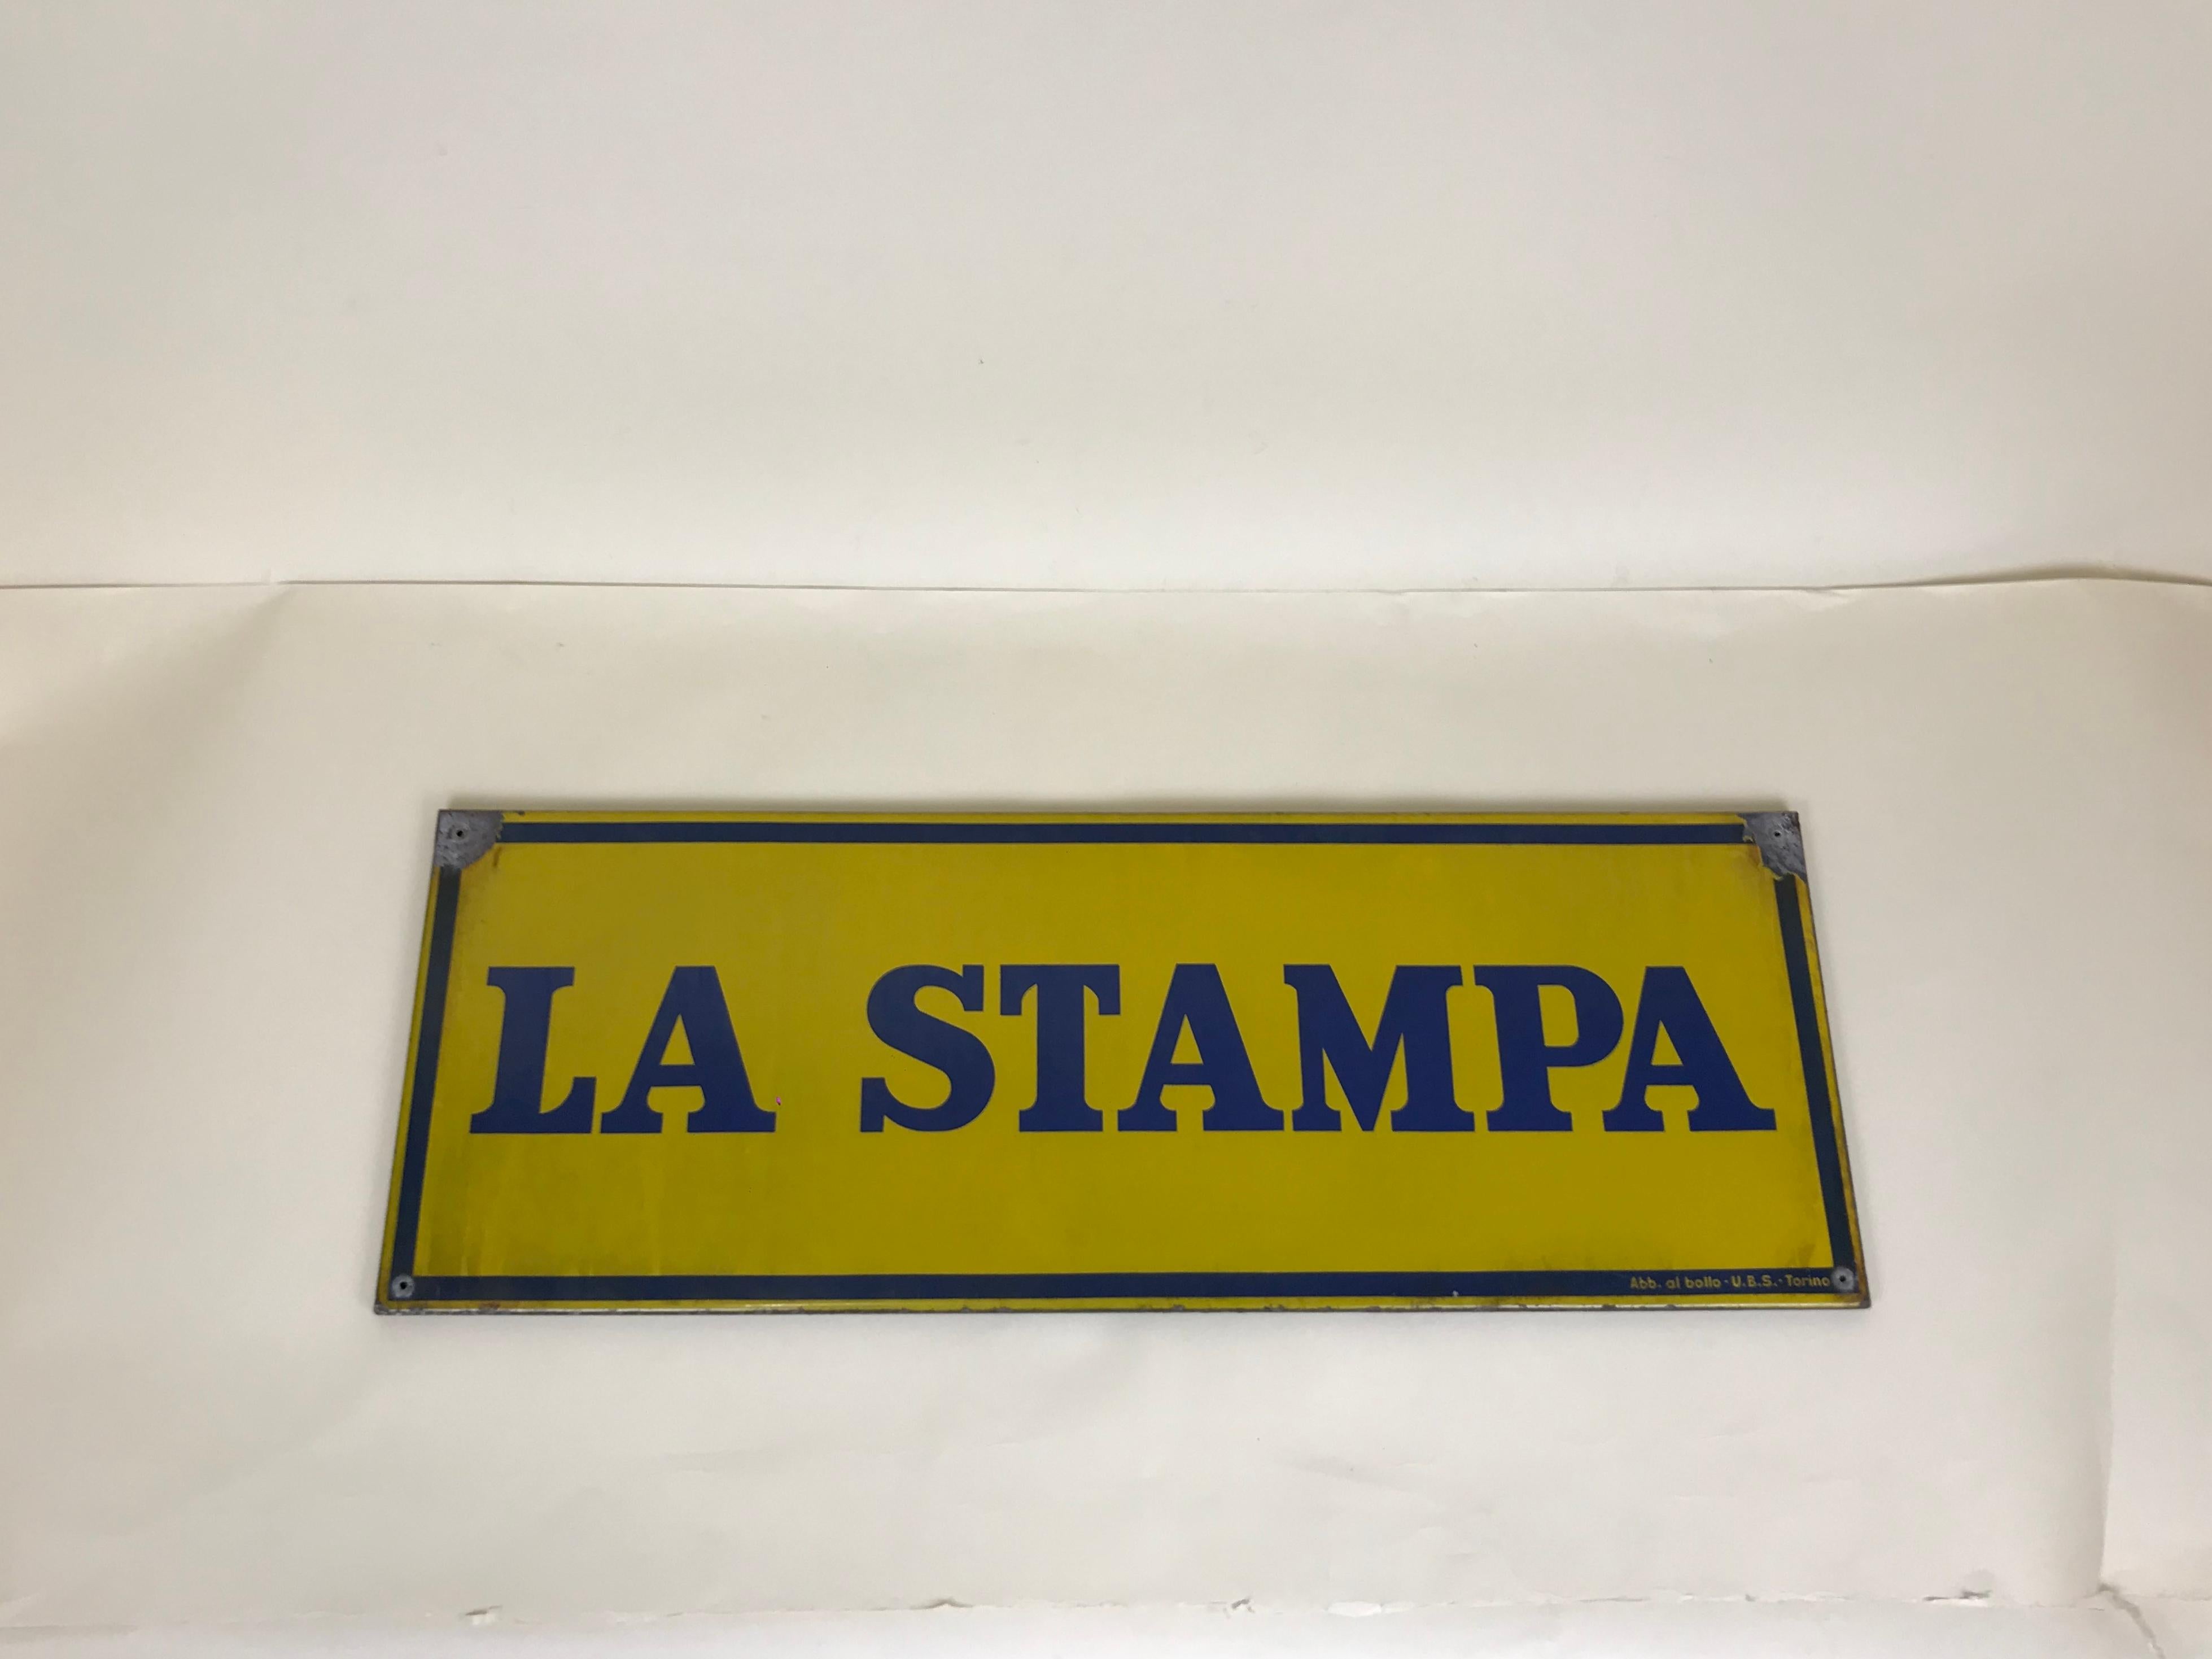 1950s enamel blue and yellow La Stampa sign.

Produced by U.B.S. Torino, Italy. Signed 